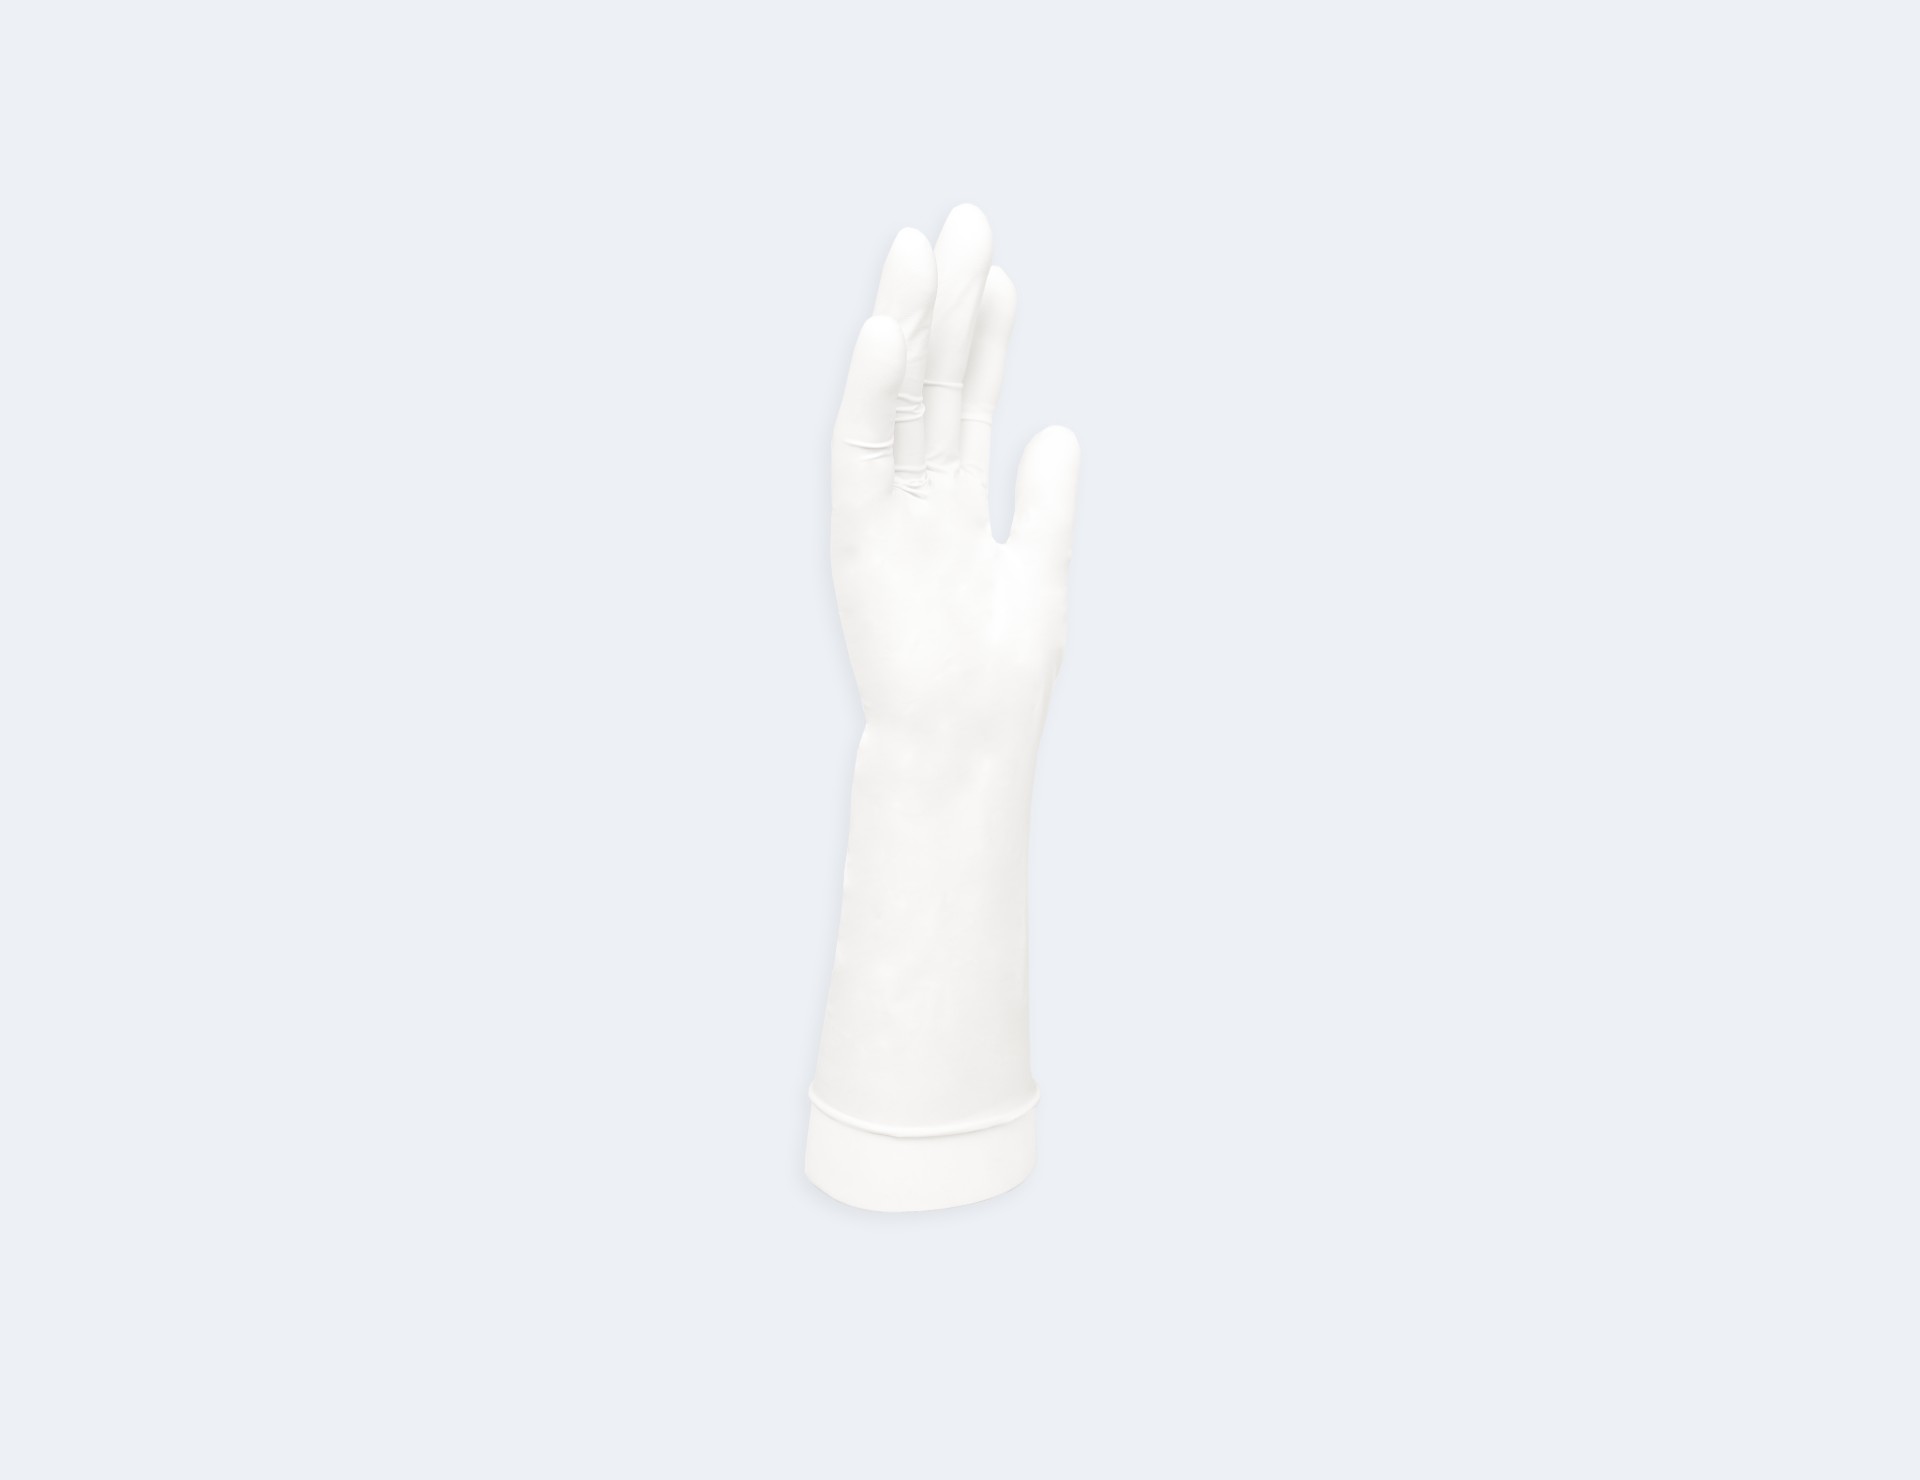 INTCO Medical Disposable Cleanroom Nitrile Gloves